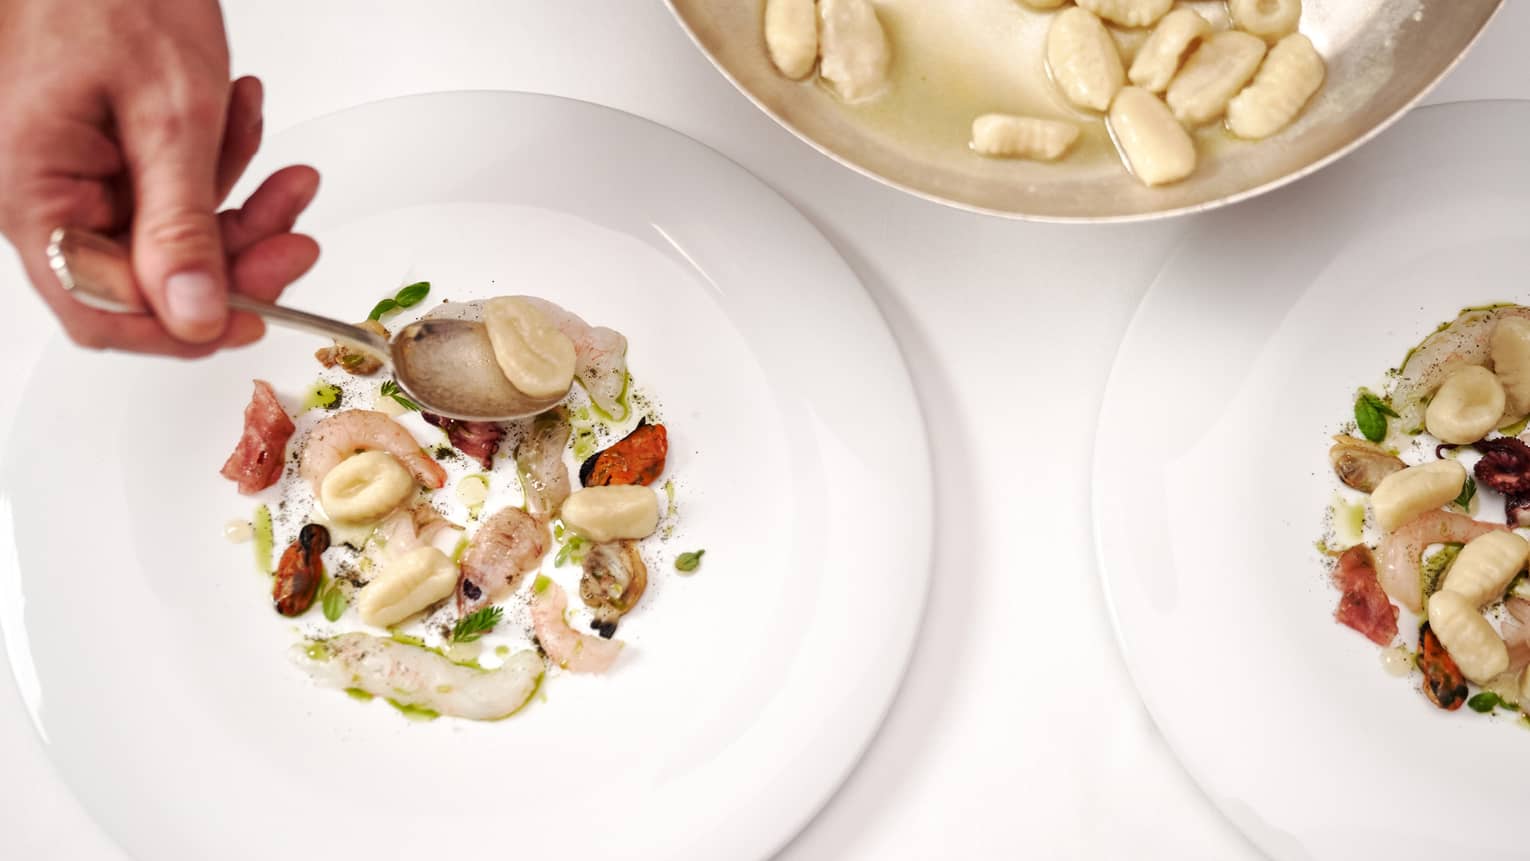 Gnocchi with raw seafood.